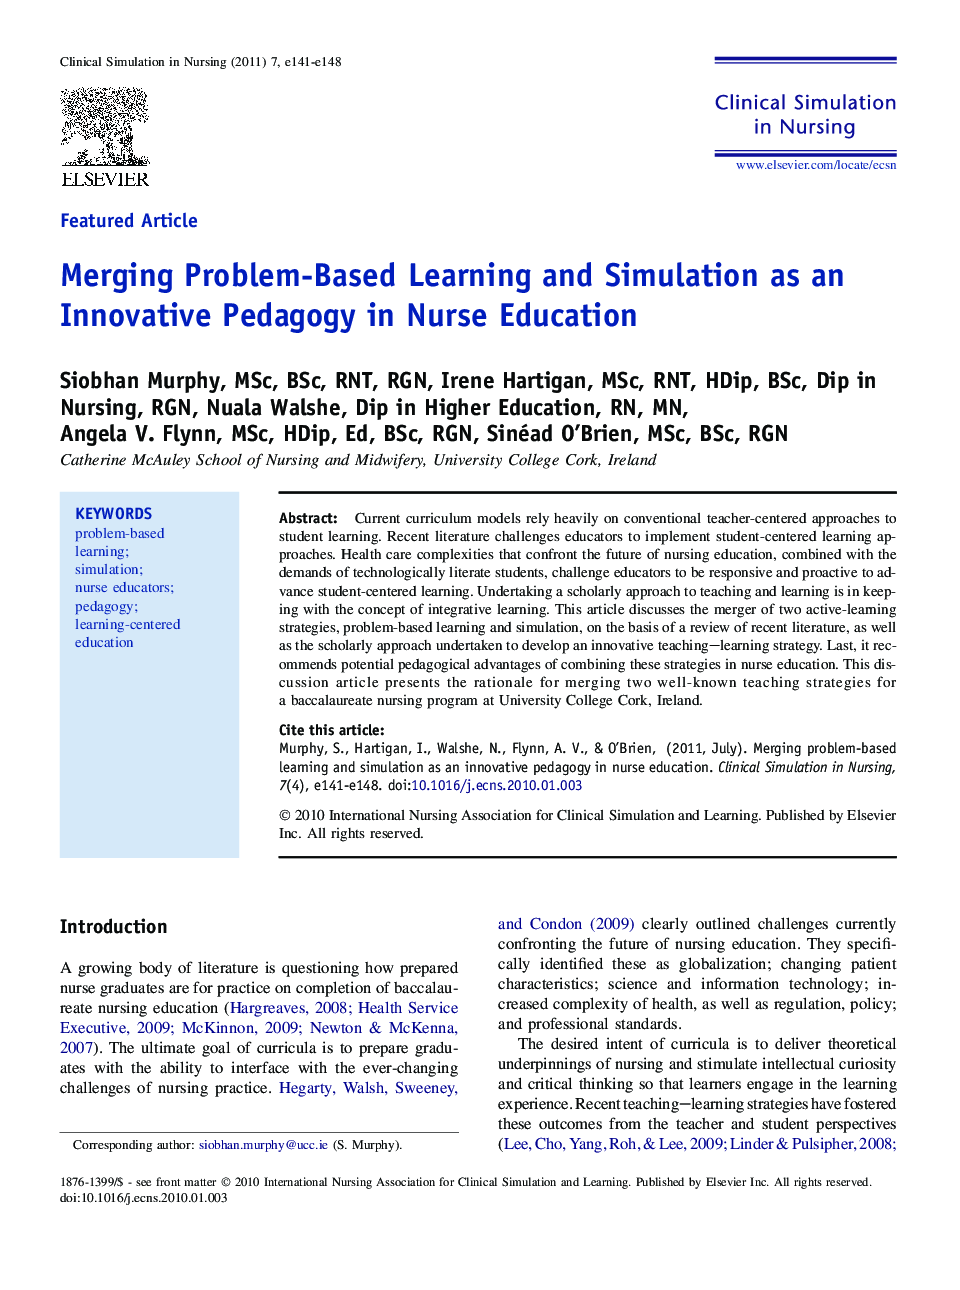 Merging Problem-Based Learning and Simulation as an Innovative Pedagogy in Nurse Education